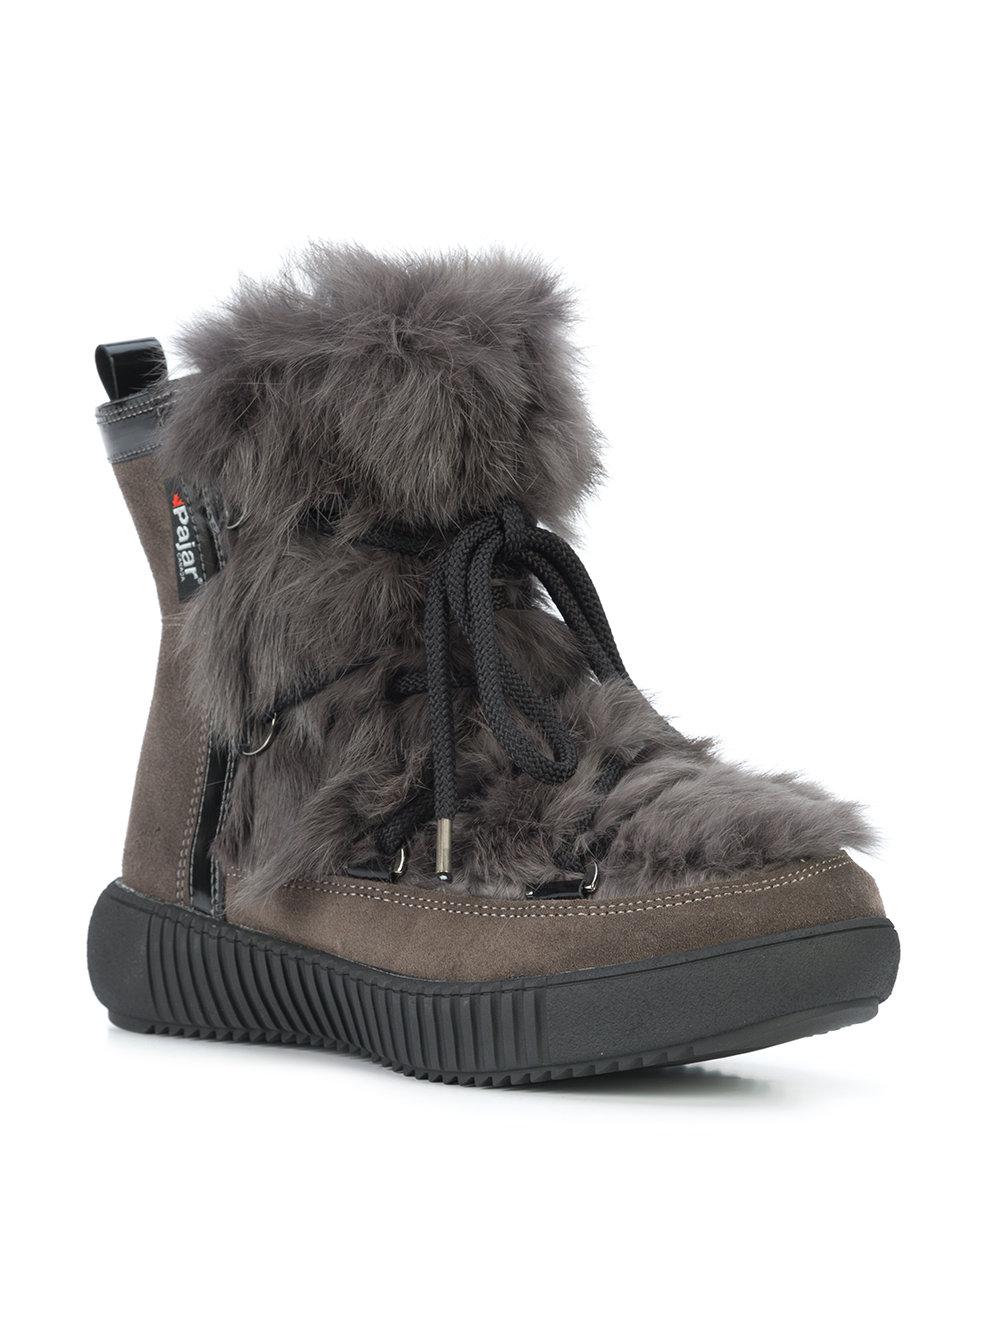 Pajar Suede Anet Snow Boots in Grey (Grey) - Lyst